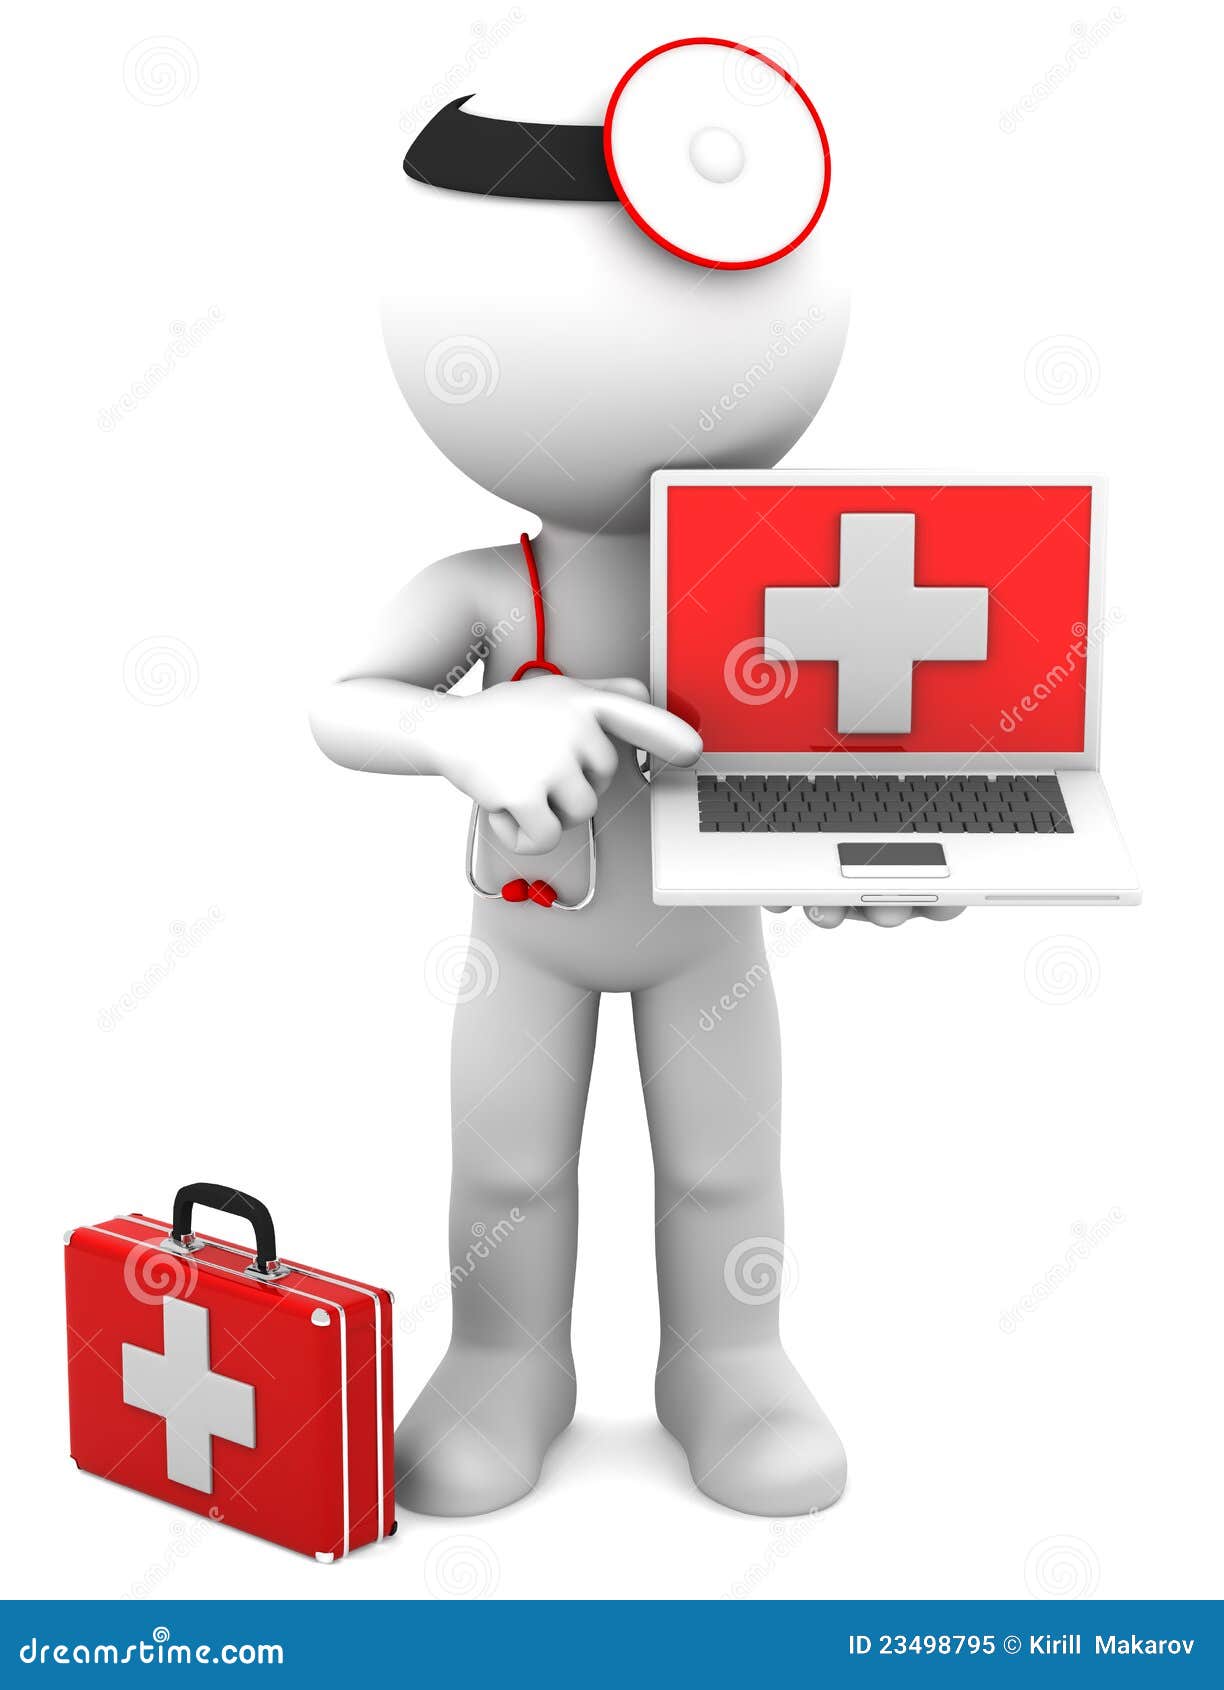 medic with laptop